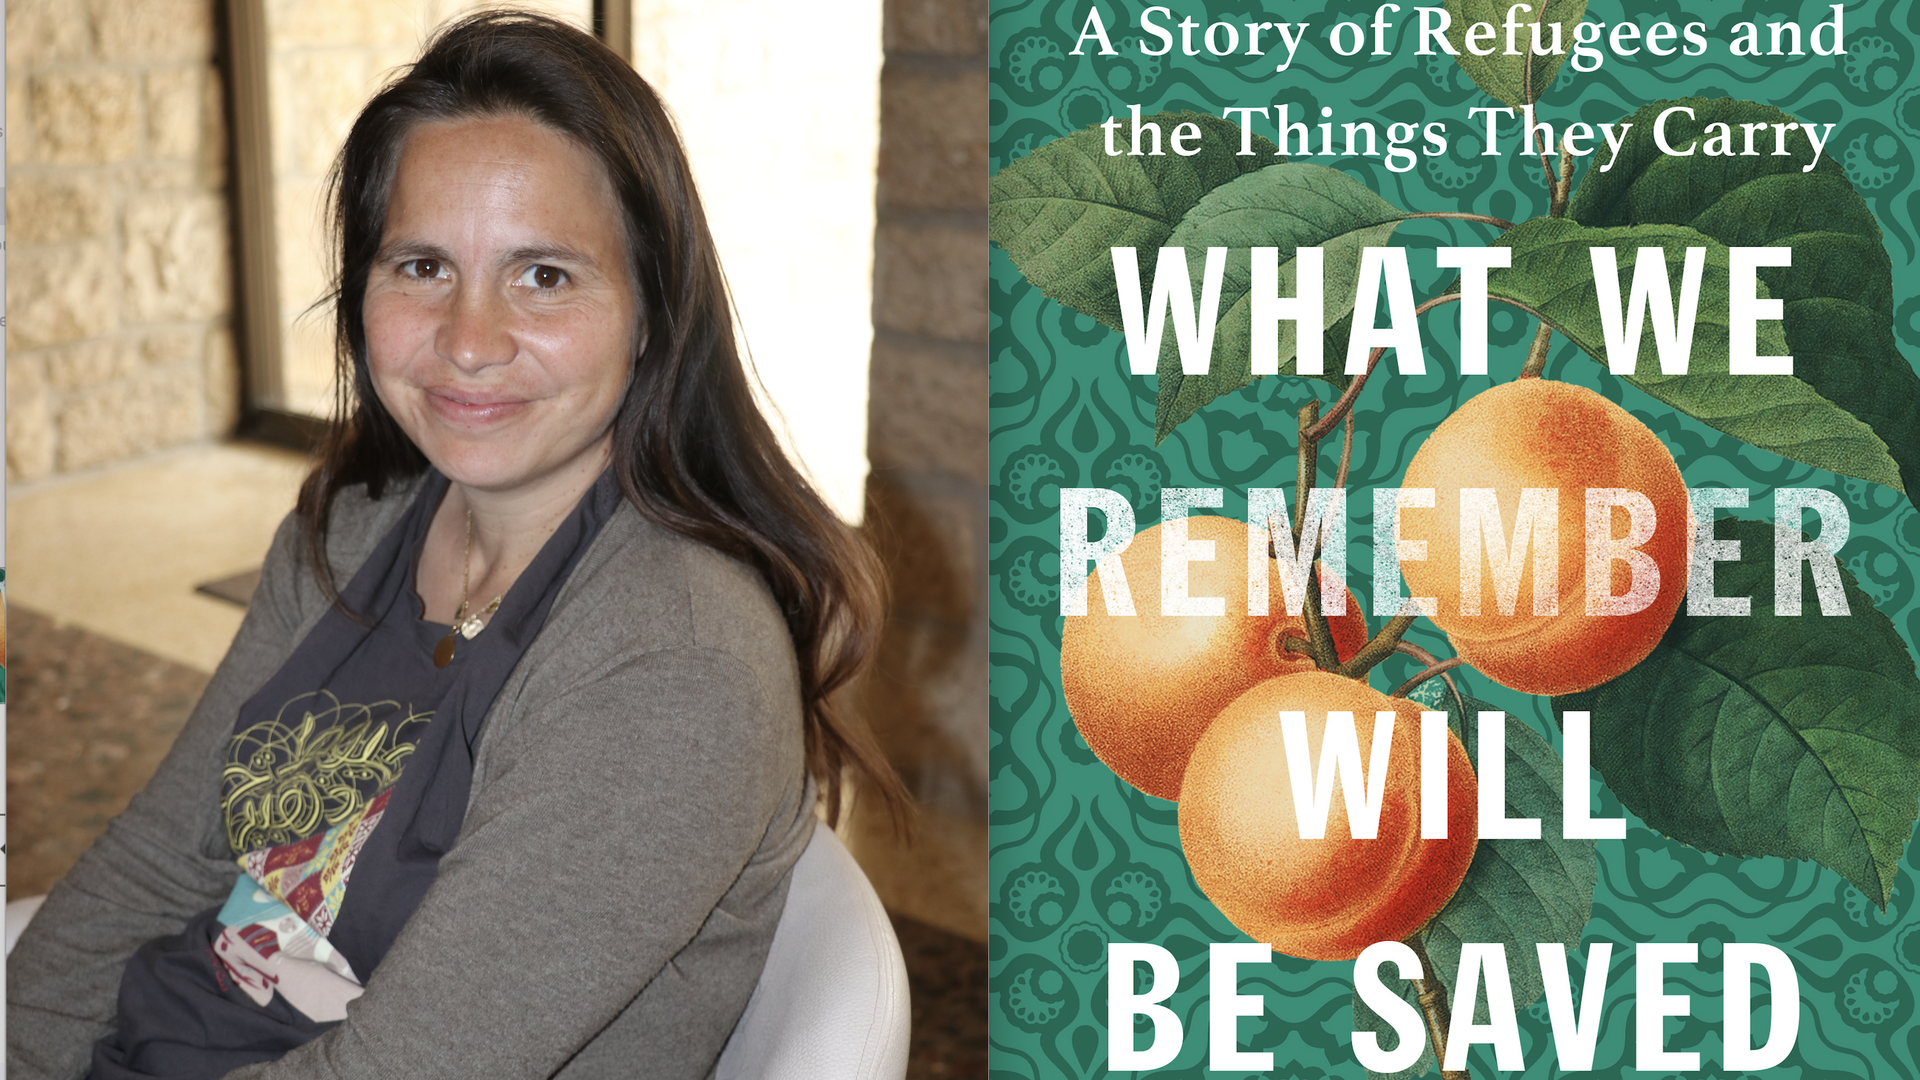 Headshot of Stephanie Saldaña and her new book, What We Remember Will Be Saved: A Story of Refugees and the Things They Carry.